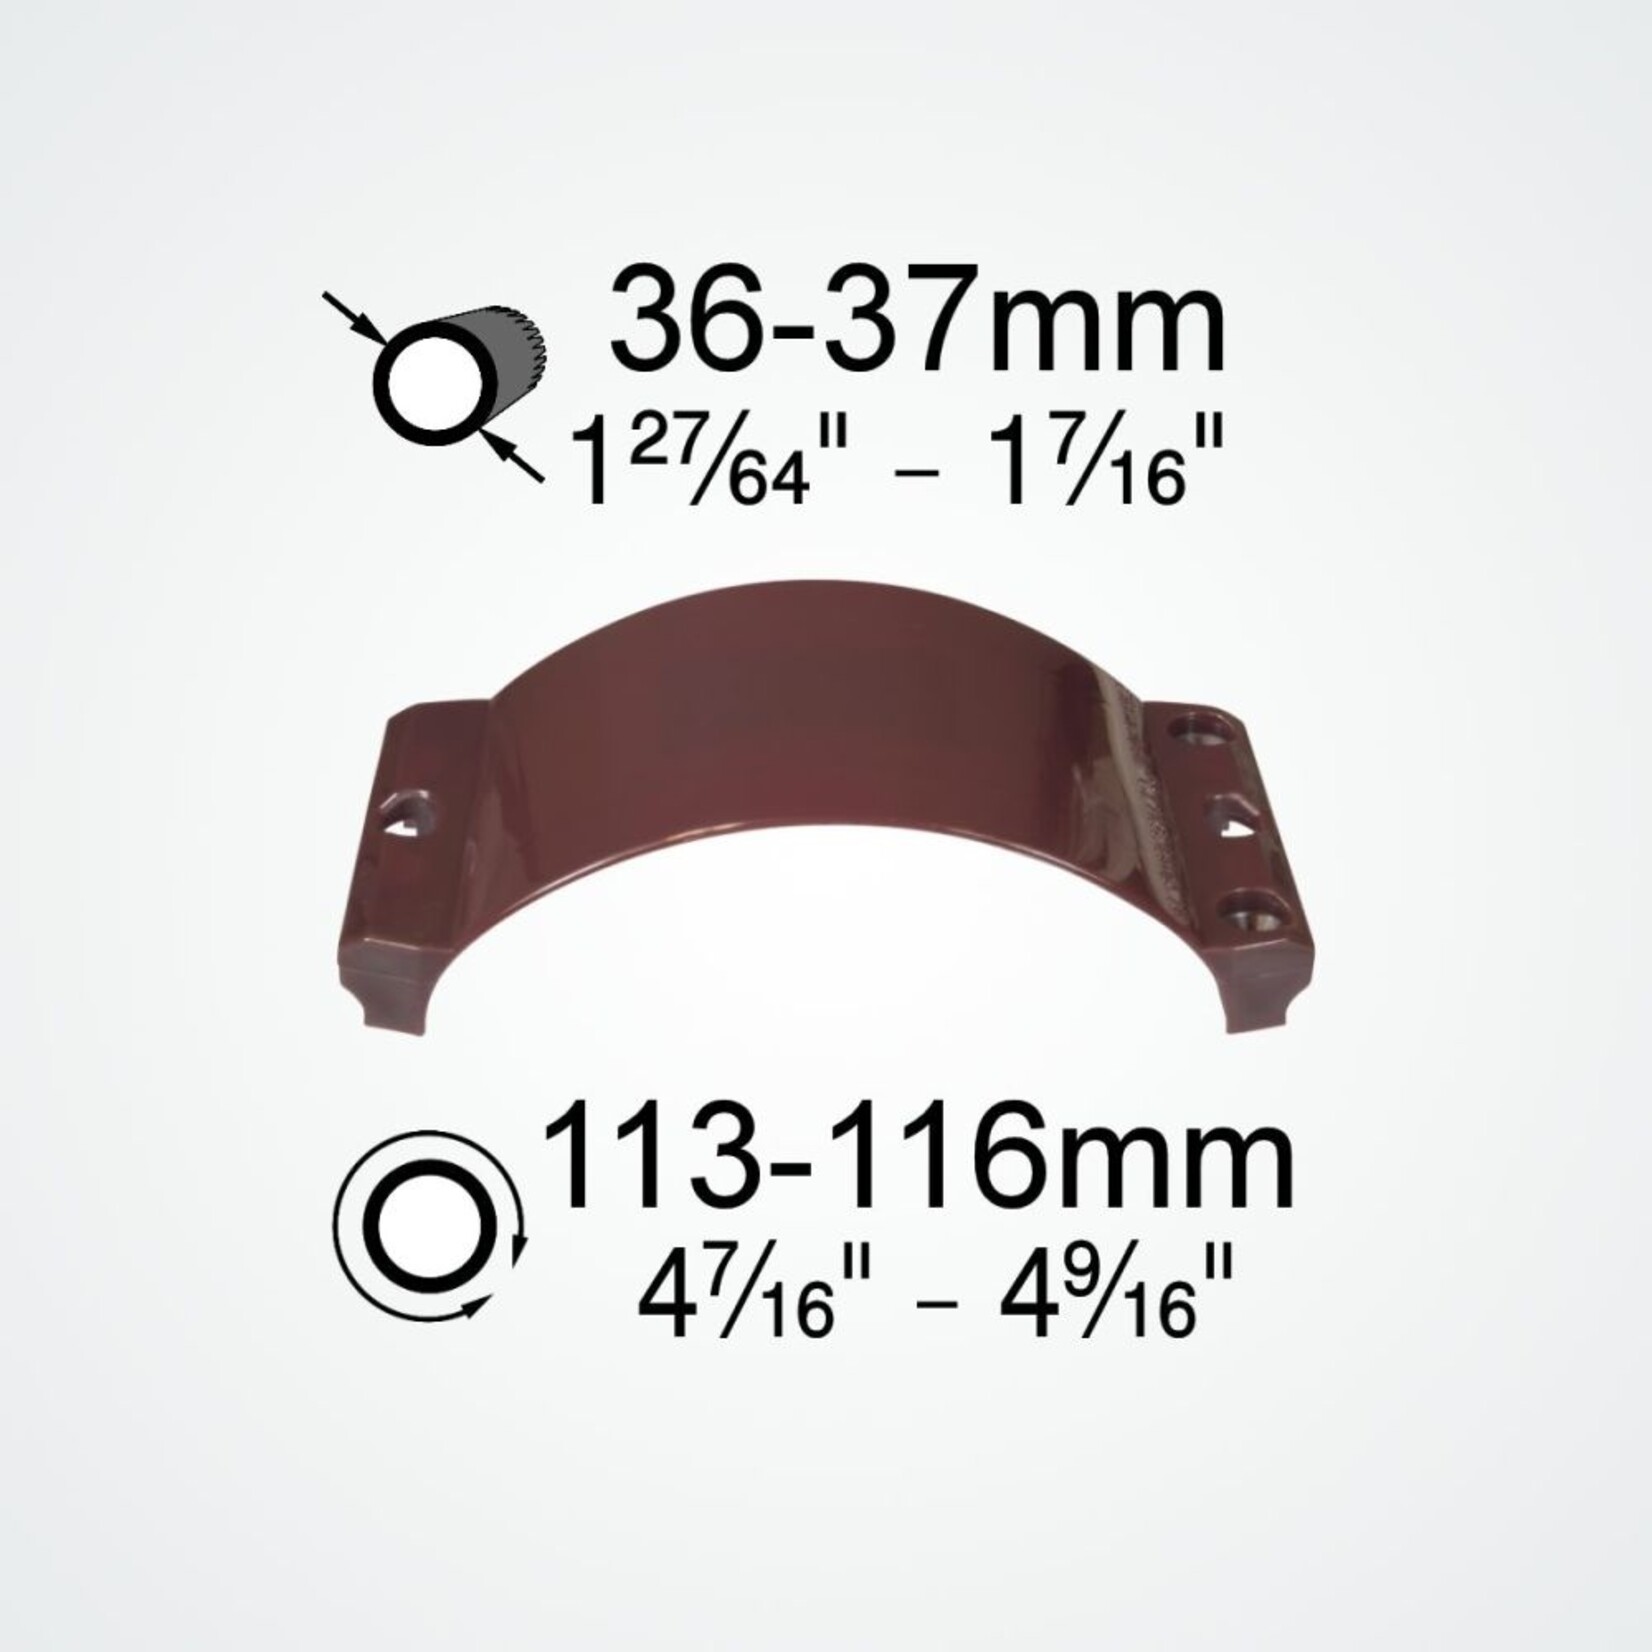 Clamcleat Clamp for 113-116mm circumference aubergine - Loose